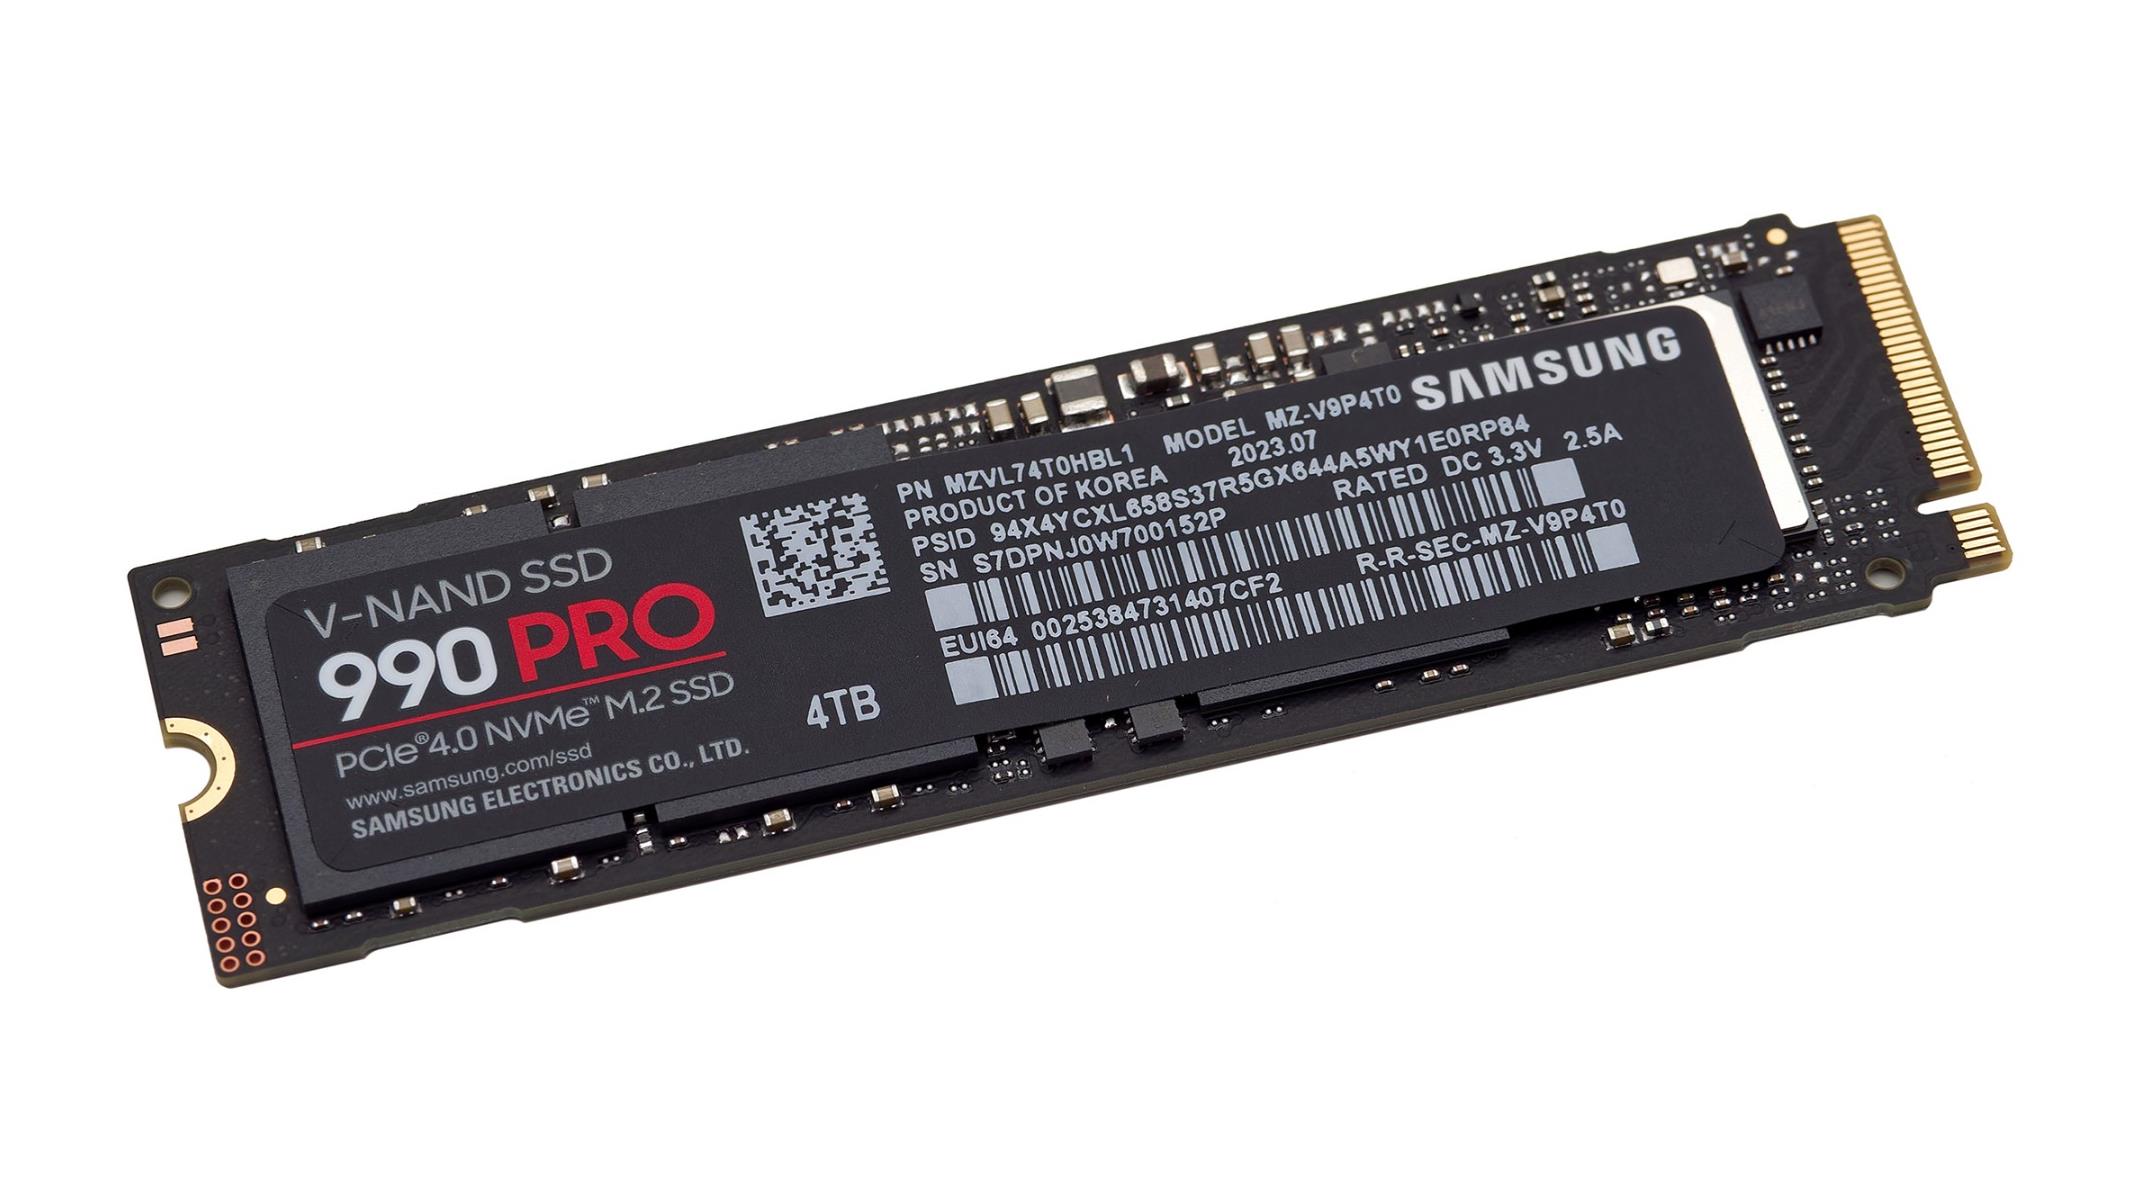 Samsung 990 Pro 4 TB - Finally a high performance single sided drive for  your Laptop! 